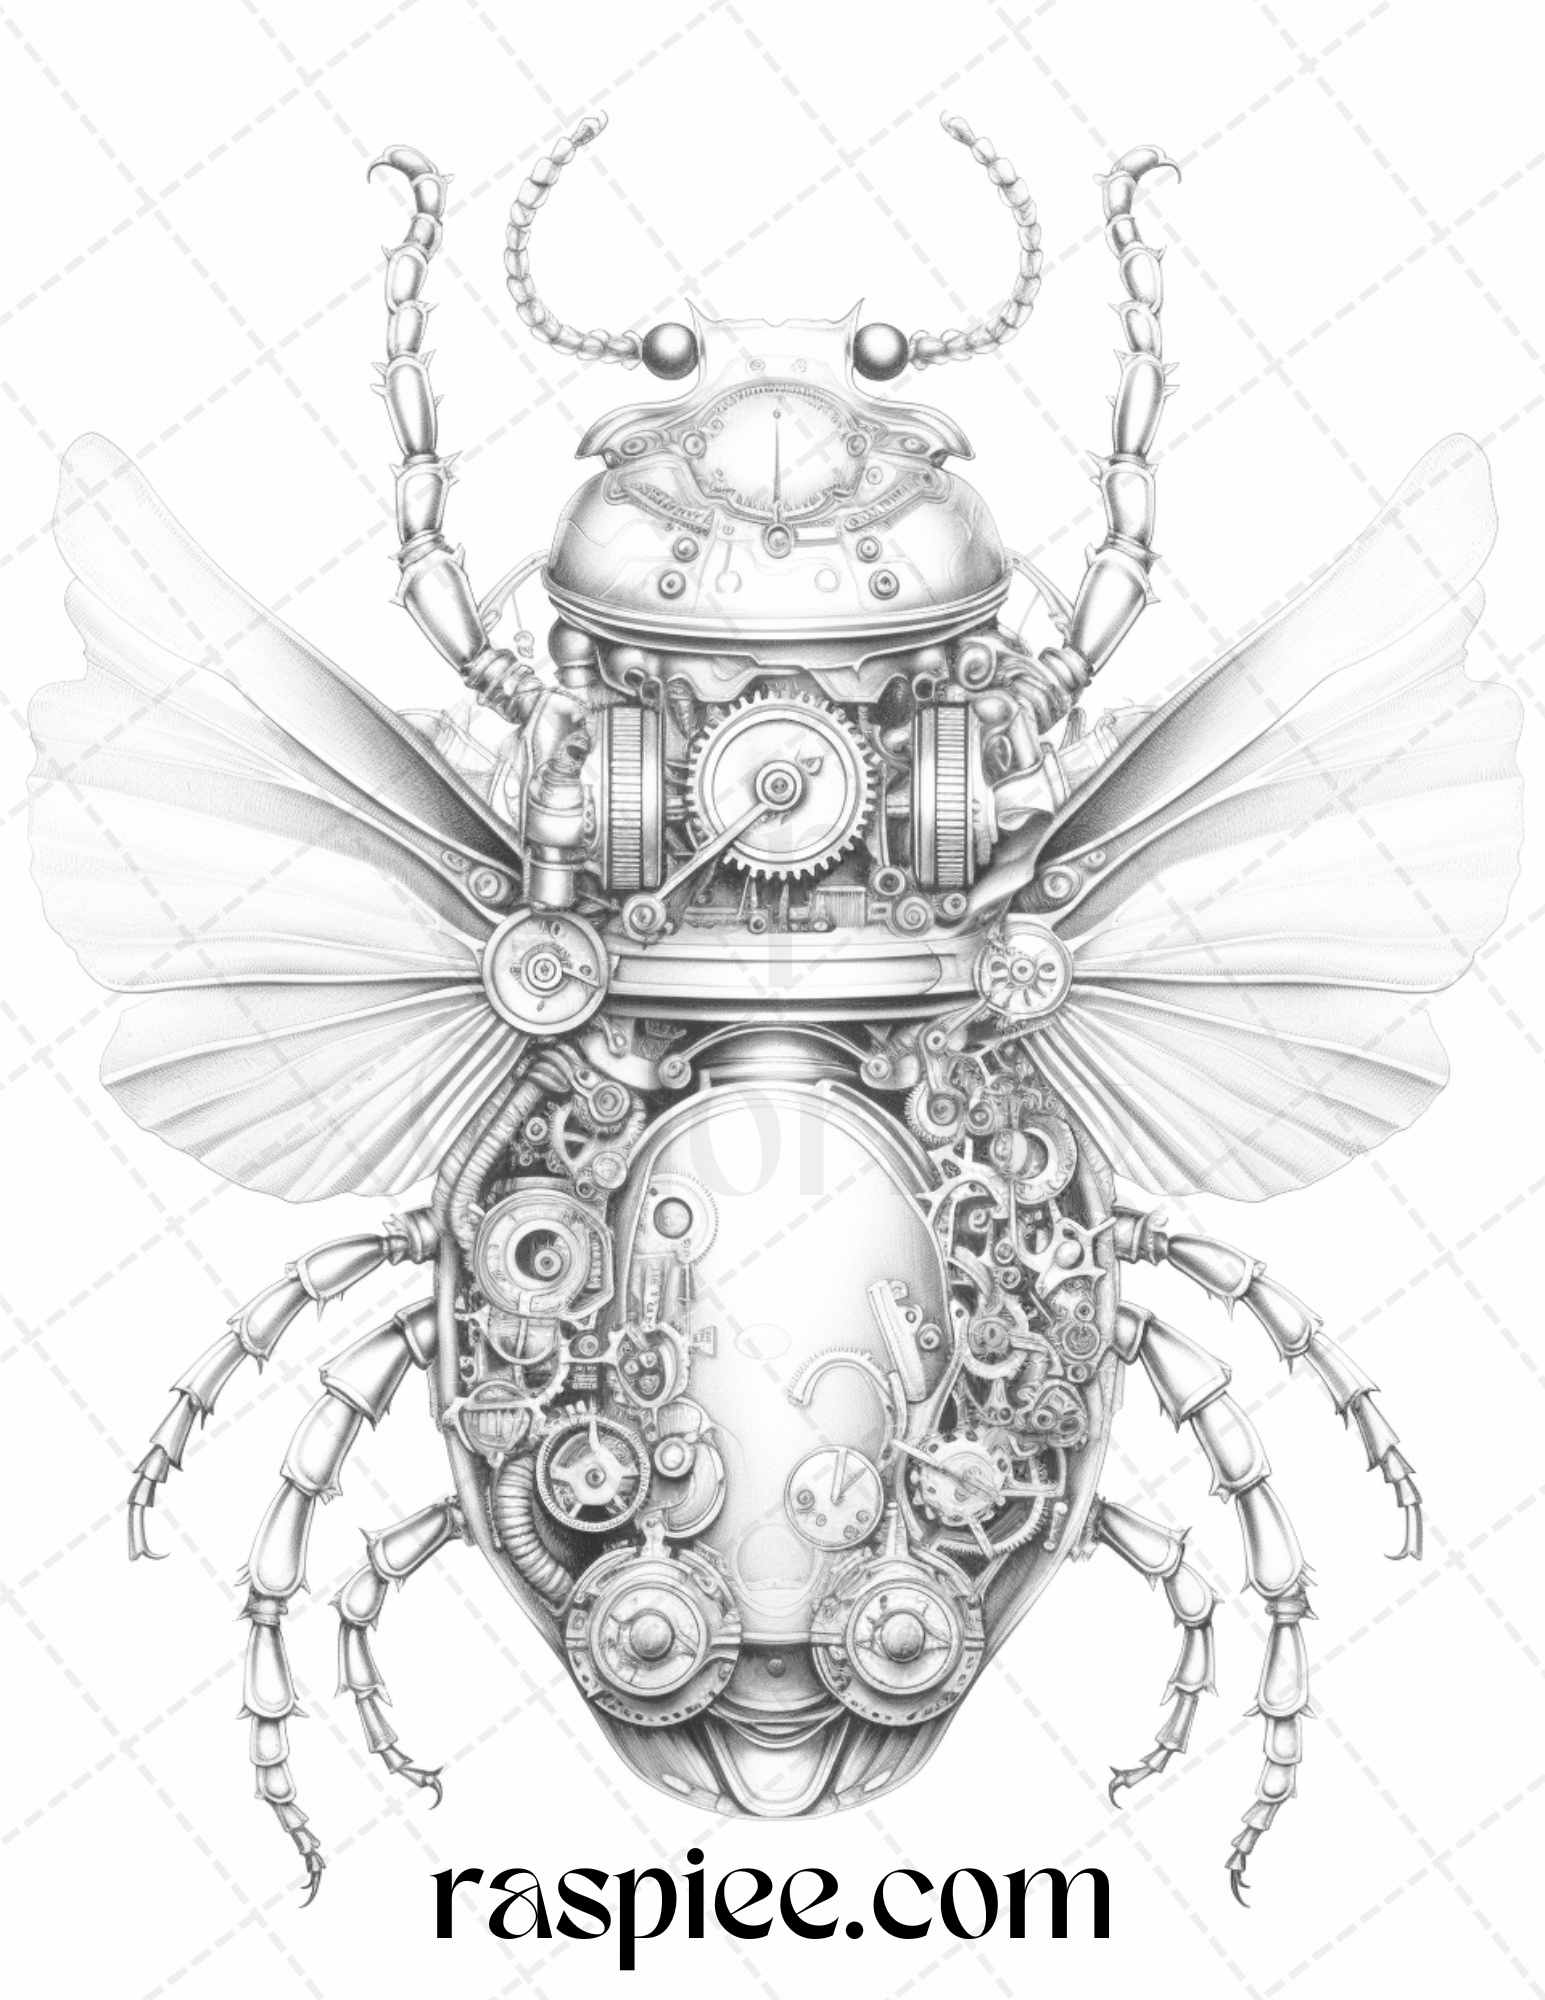 42 Steampunk Bugs Grayscale Coloring Pages Printable for Adults, PDF File Instant Download - Raspiee Coloring